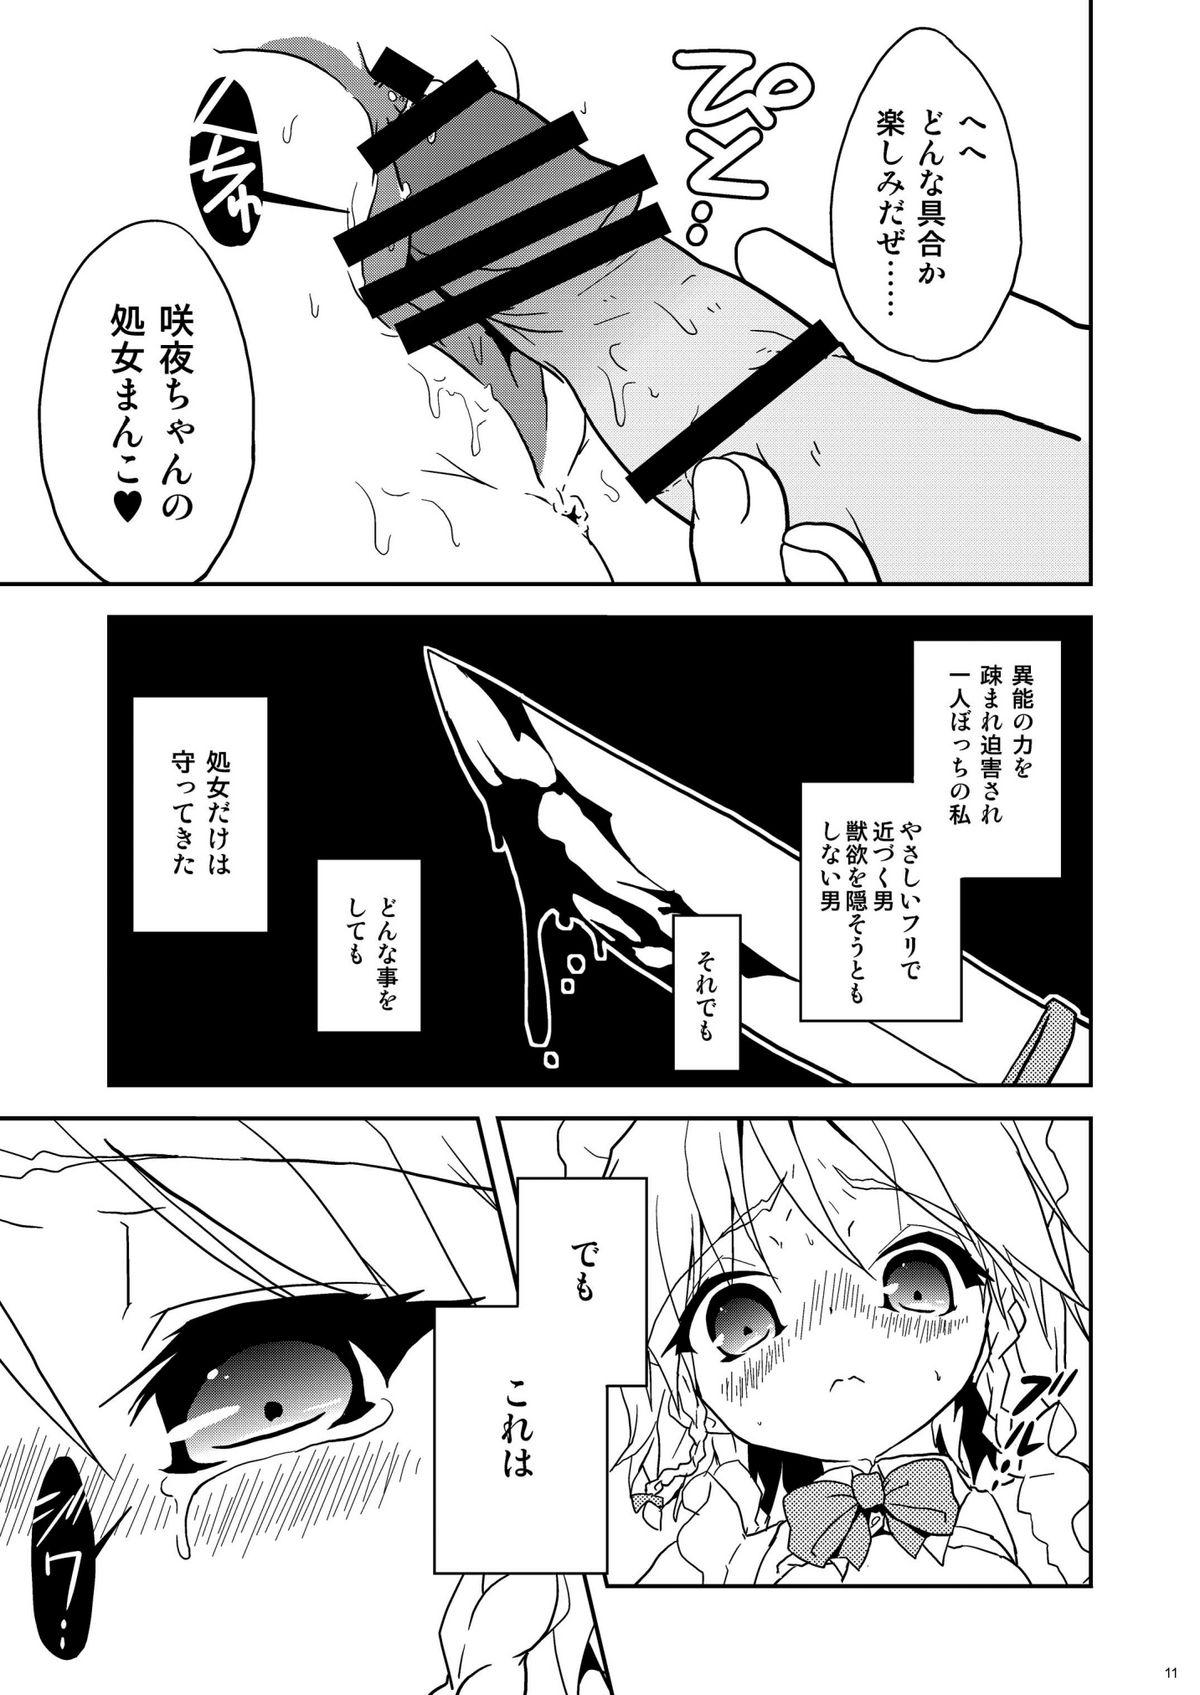 Perra Silverstar - Touhou project Tranny - Page 11